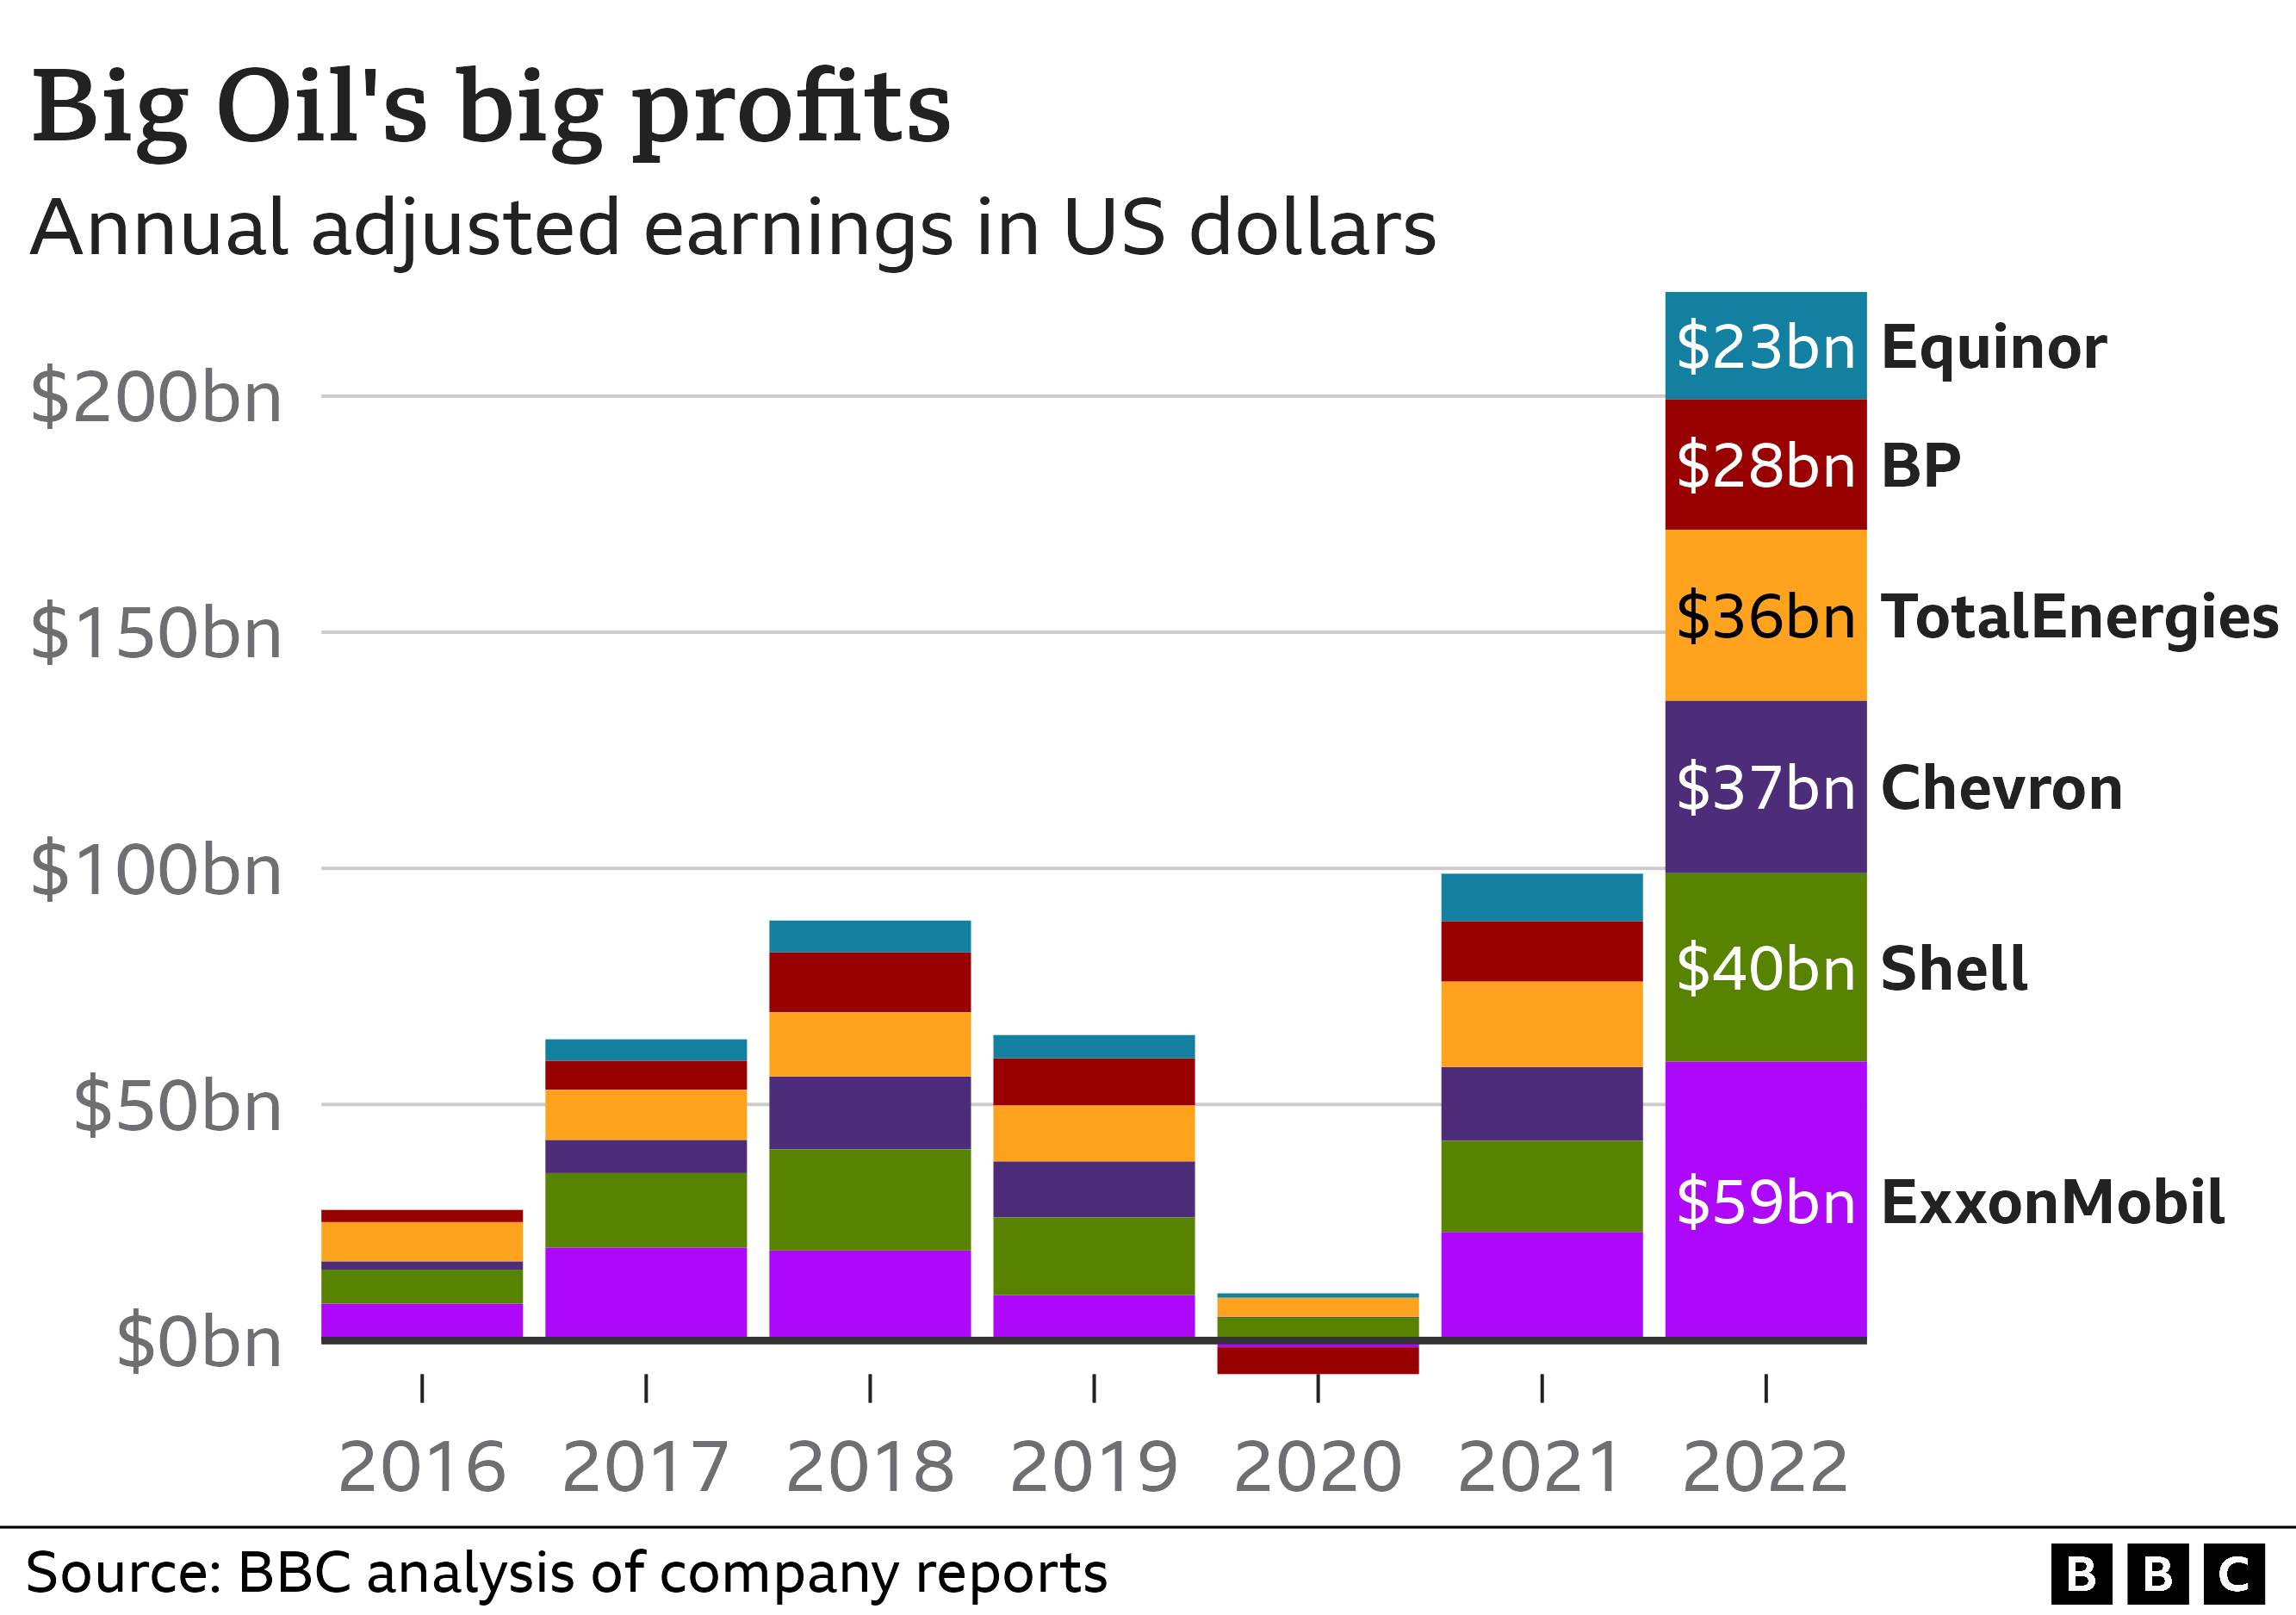 Bar chart showing the combined earnings of Big Oil companies. In 2022, they reached $222bn, more than double the year before.